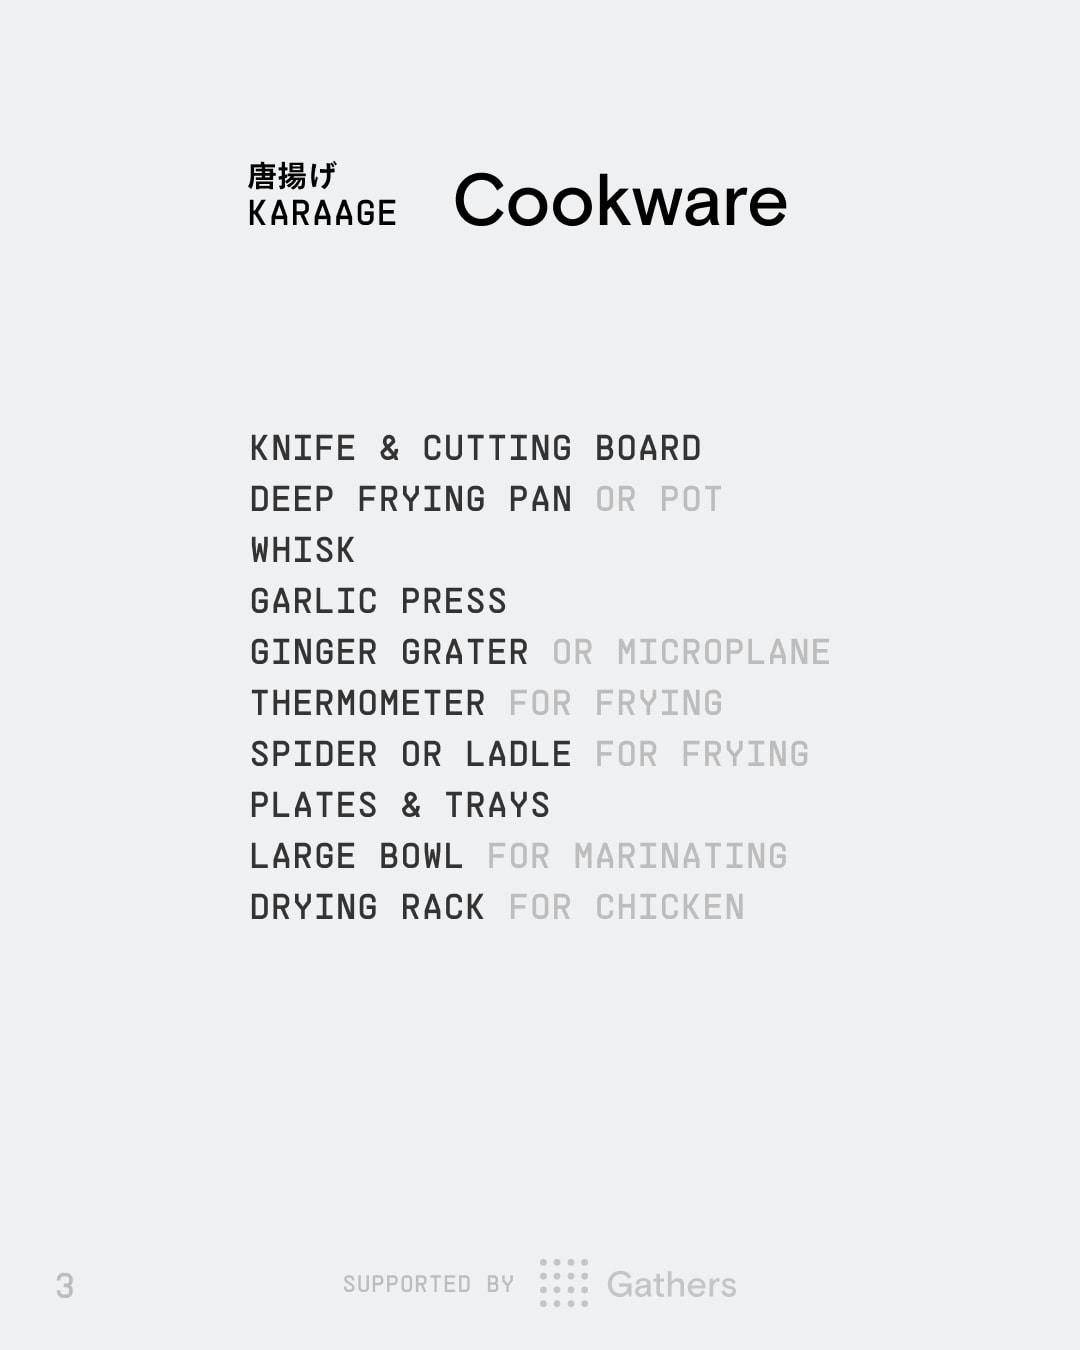 The required cookware